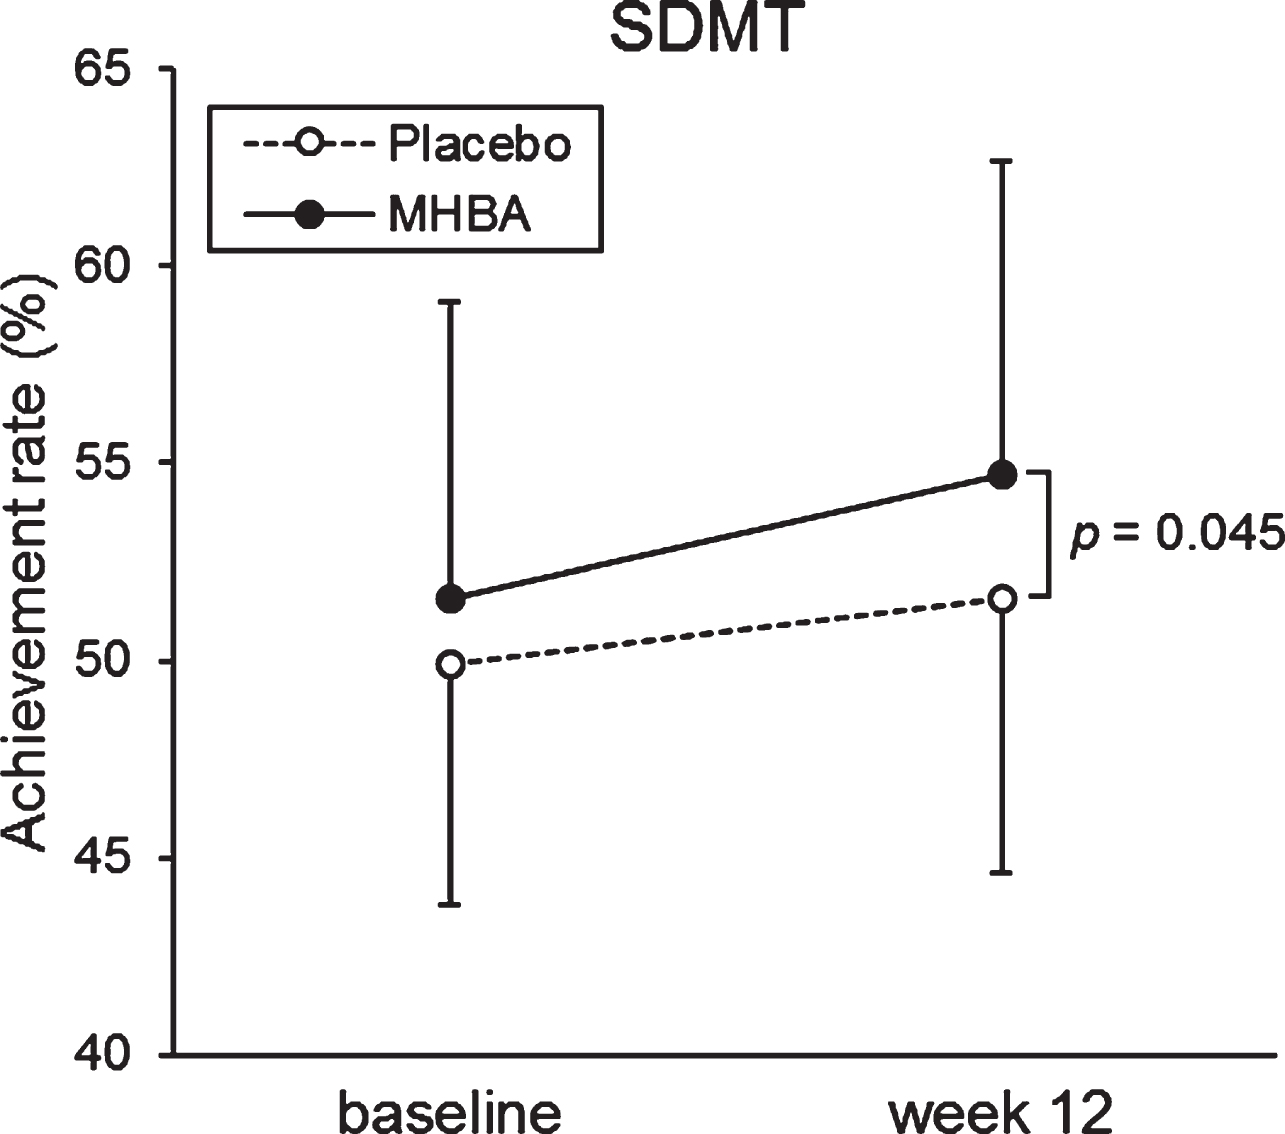 The mean values of SDMT at baseline and week twelve. The solid line indicates the MHBA group (n = 49) and the dotted line indicates the placebo group (n = 49). Data points represent means and error bars indicate SD. p-value shows between-group differences performed using unpaired t tests.